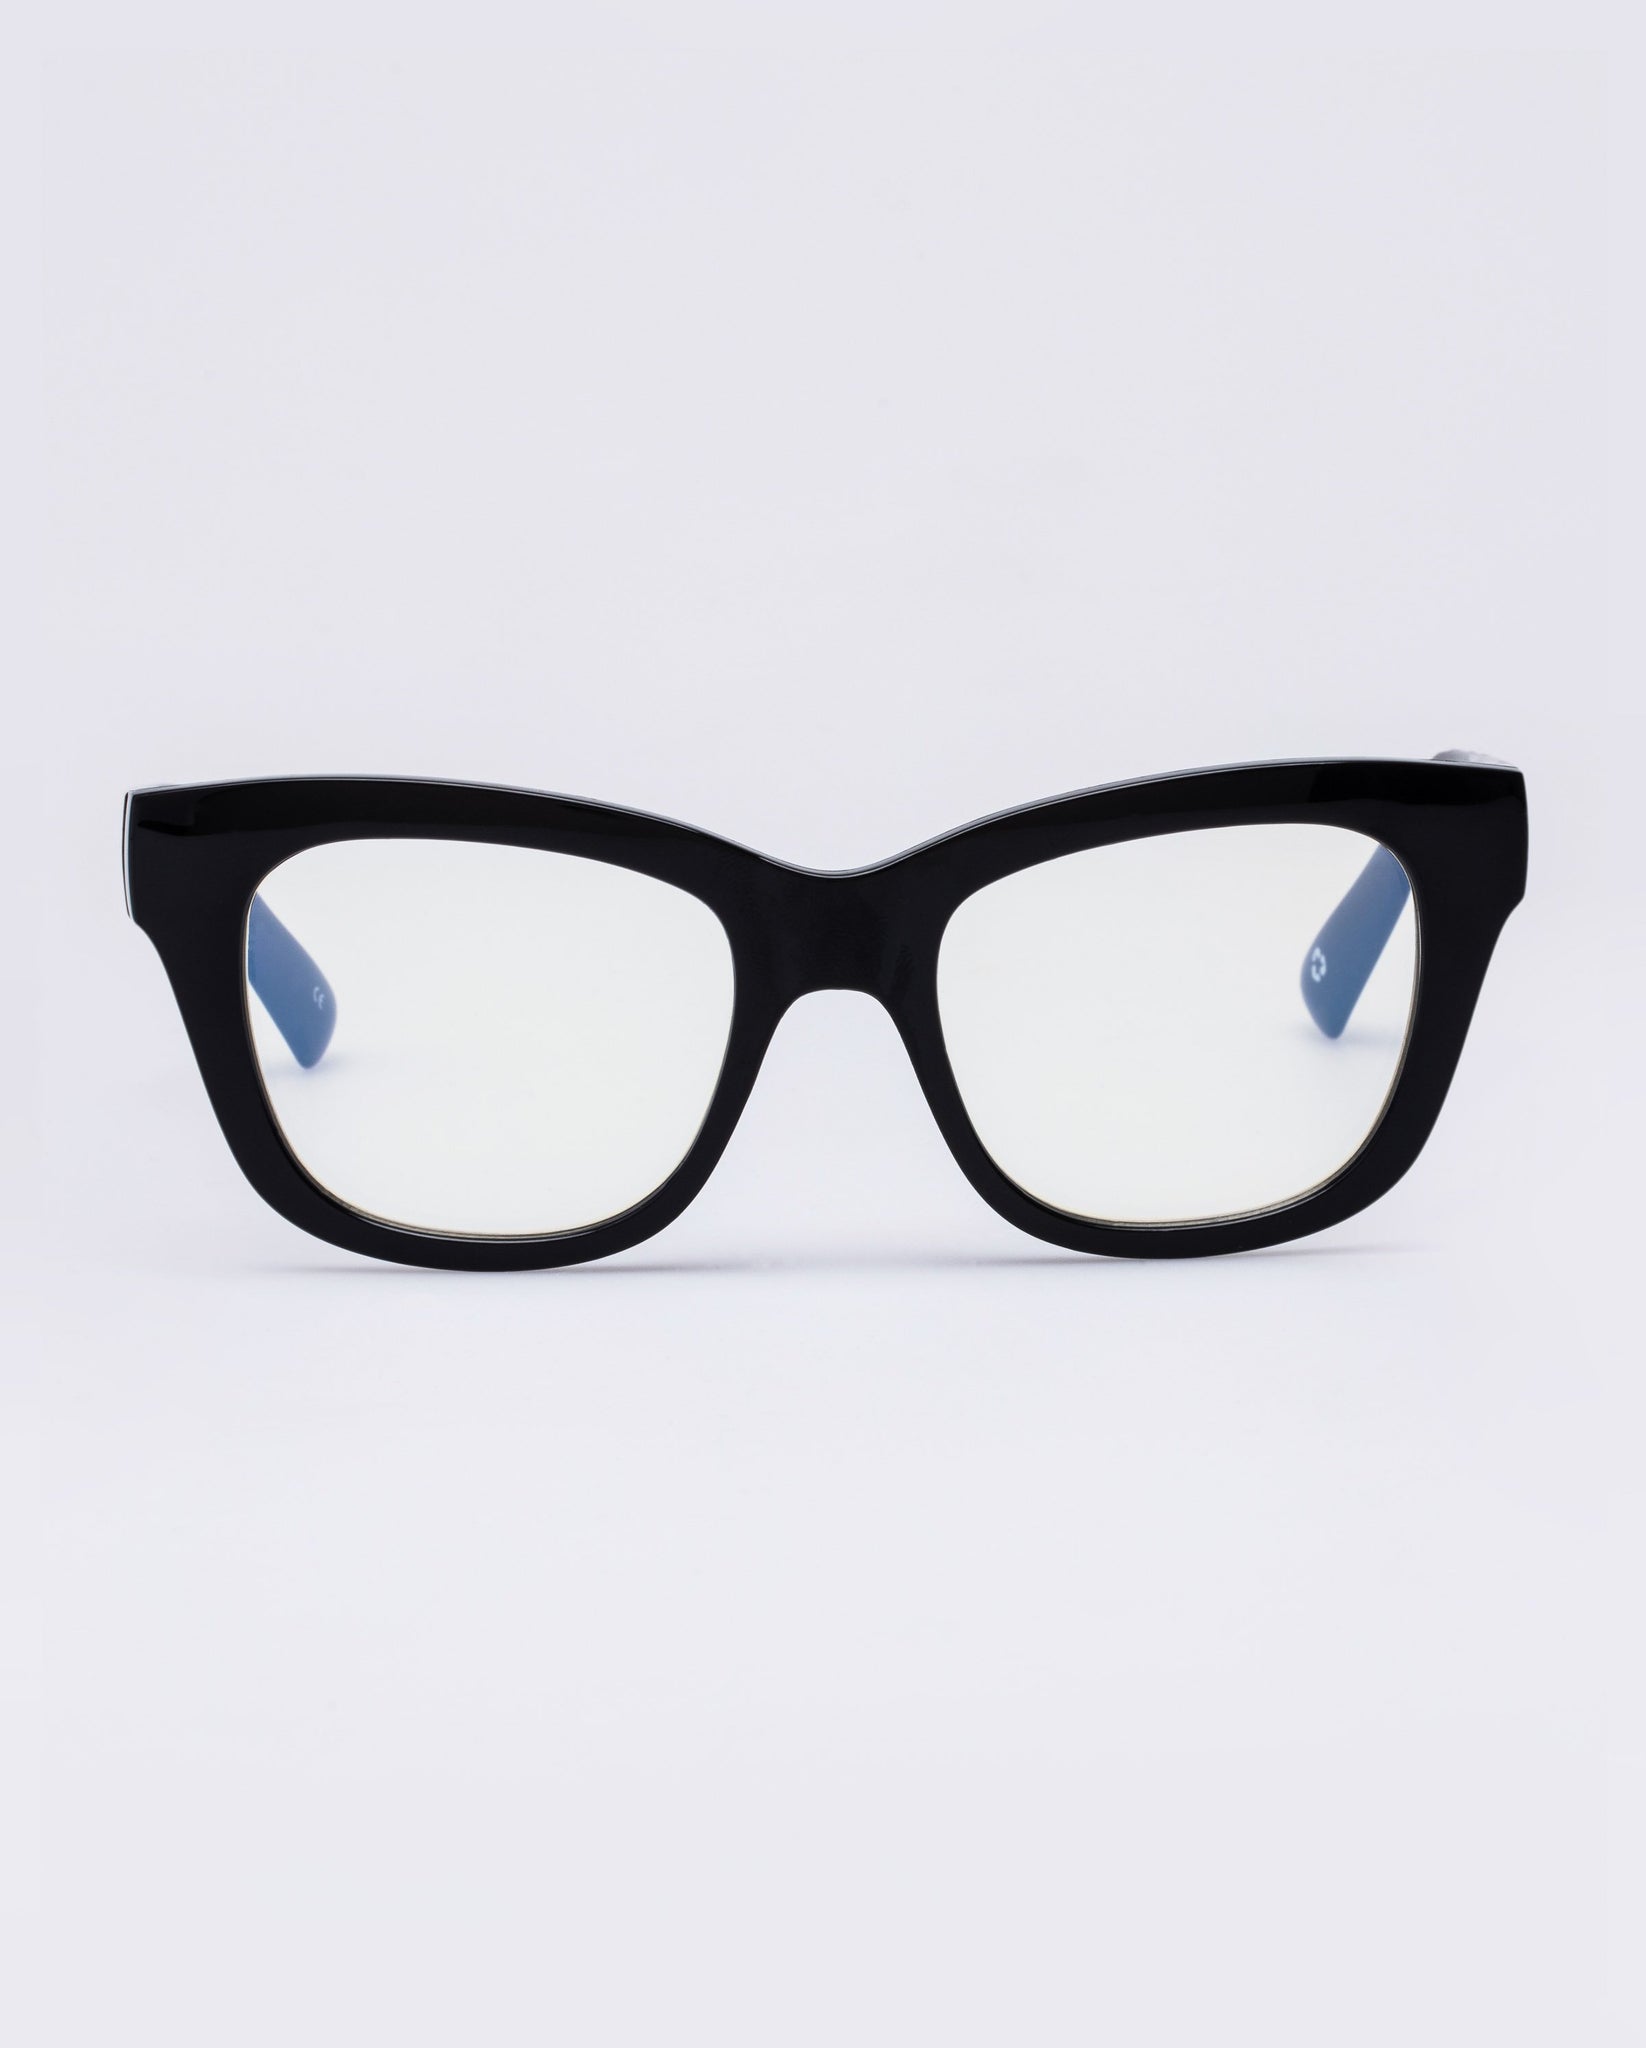 The Book Club 'The Hate Relax Me' Blue Light Reading Glasses - Black | PRESENCE Paris